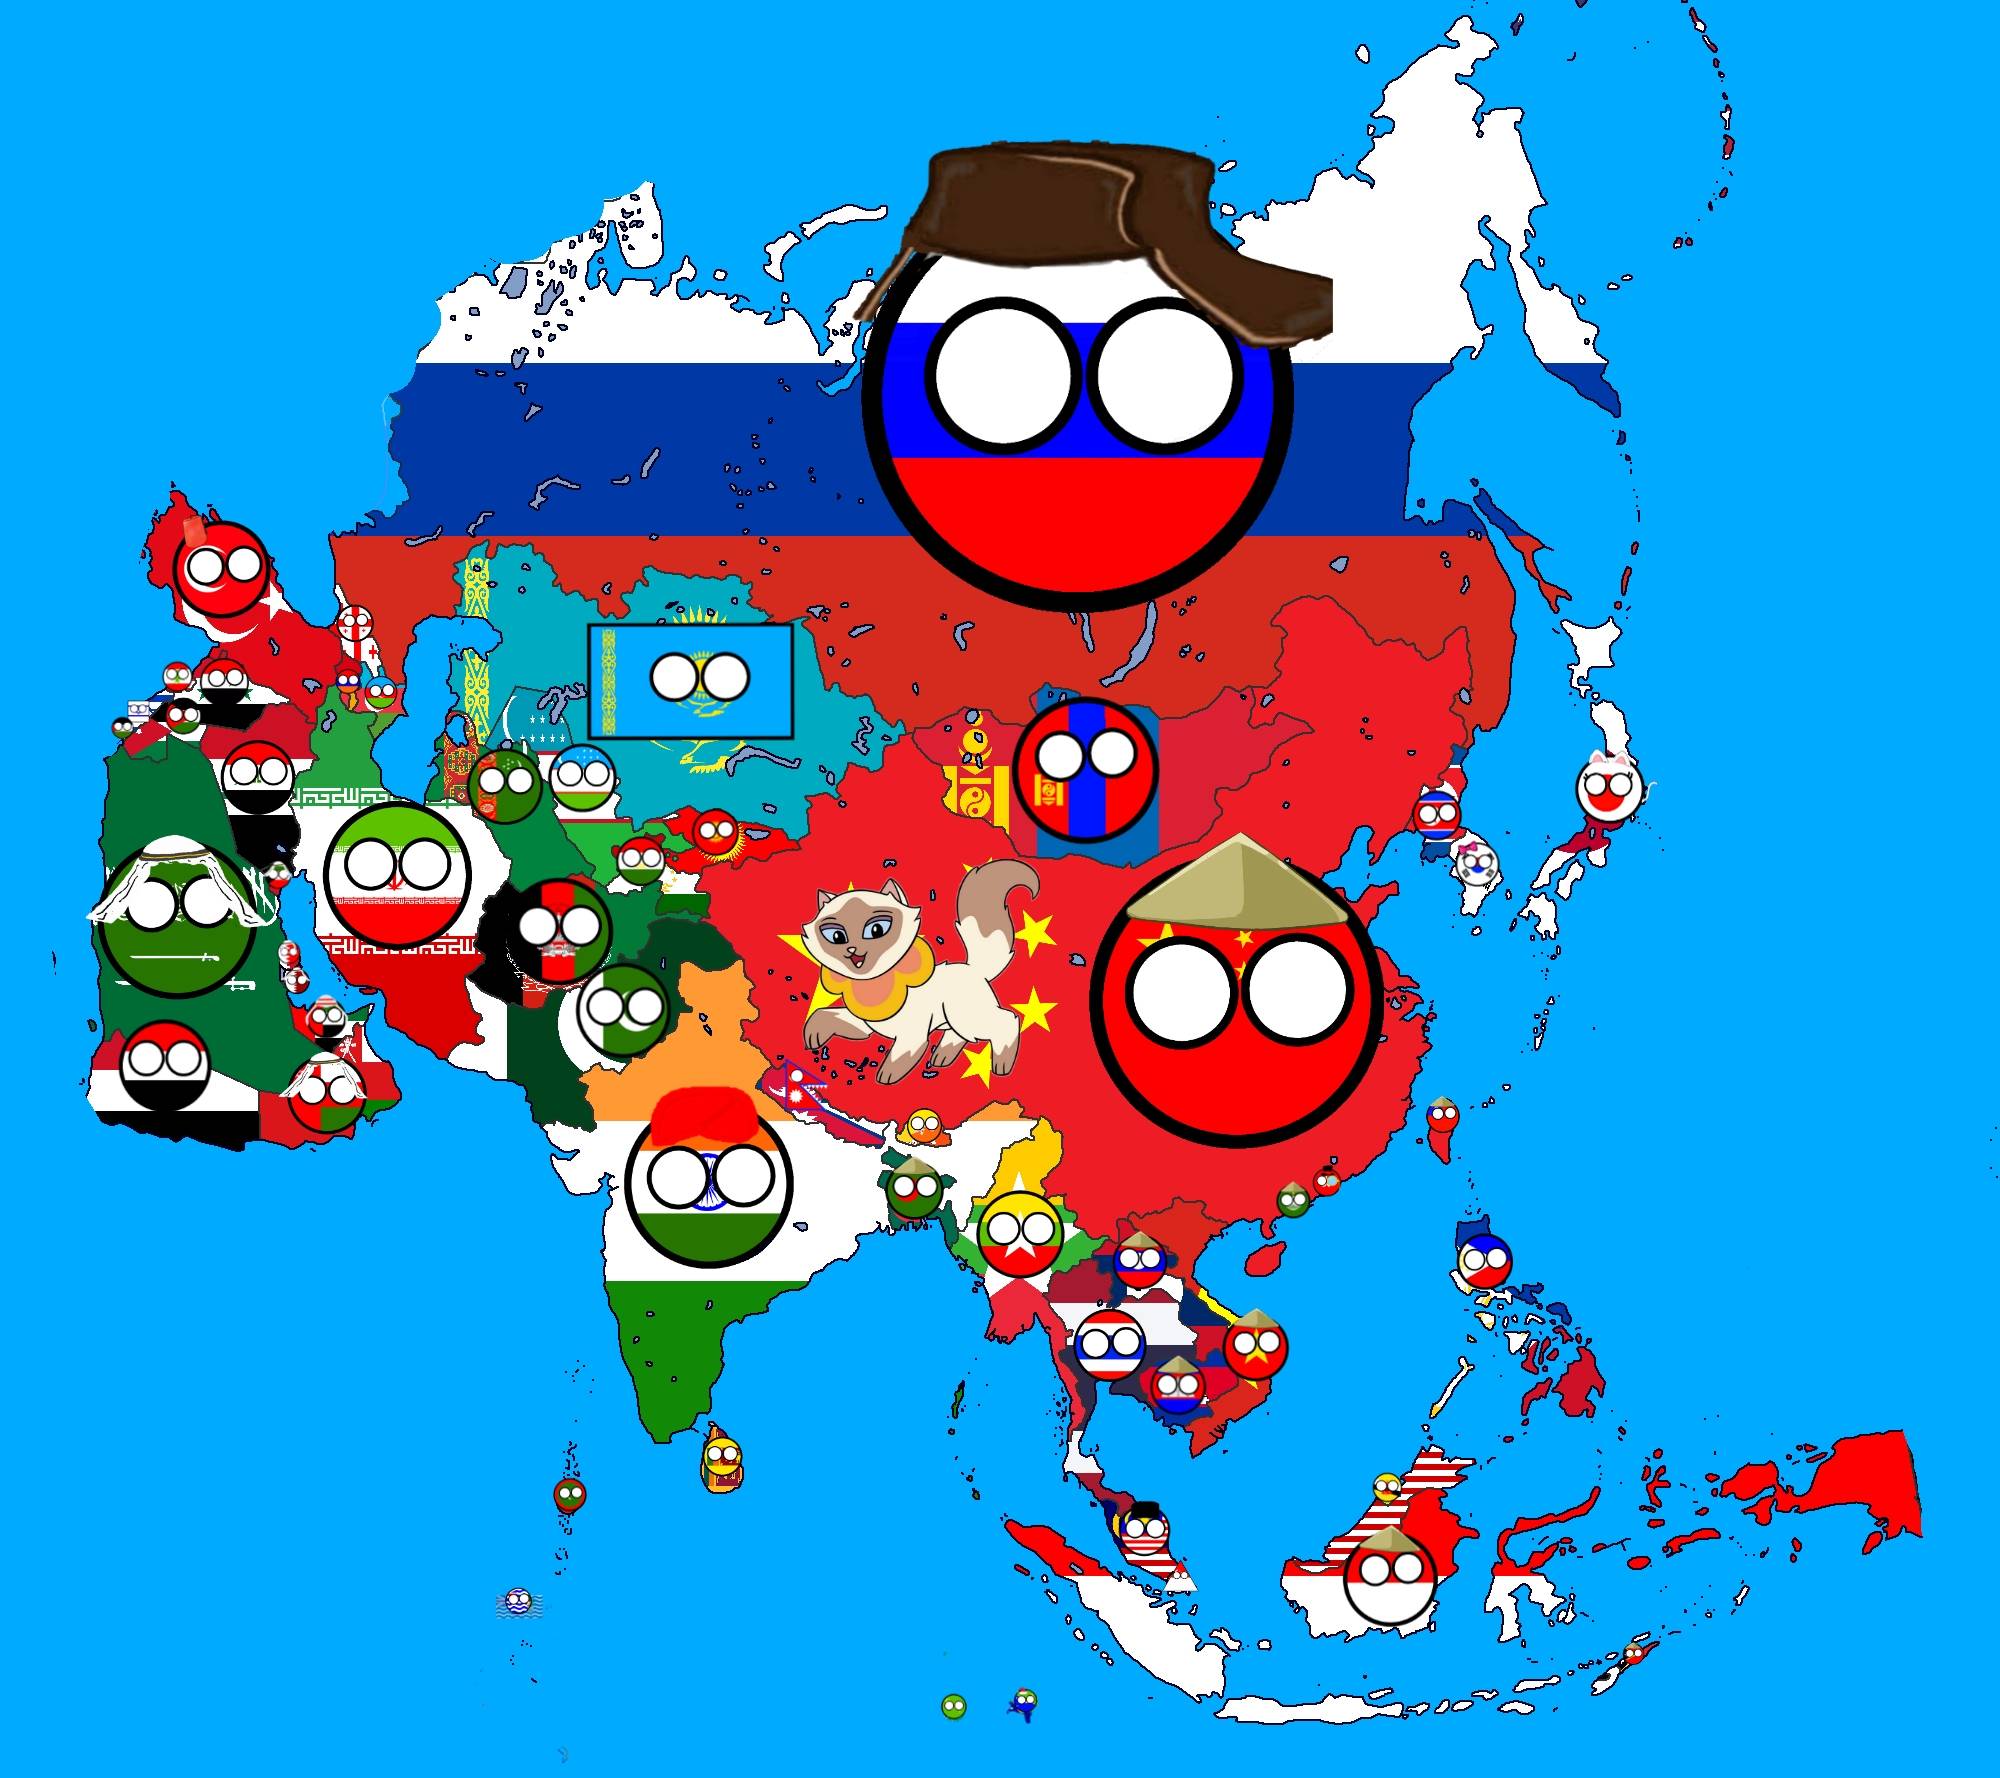 Asia map countryballs by victor3389 on DeviantArt